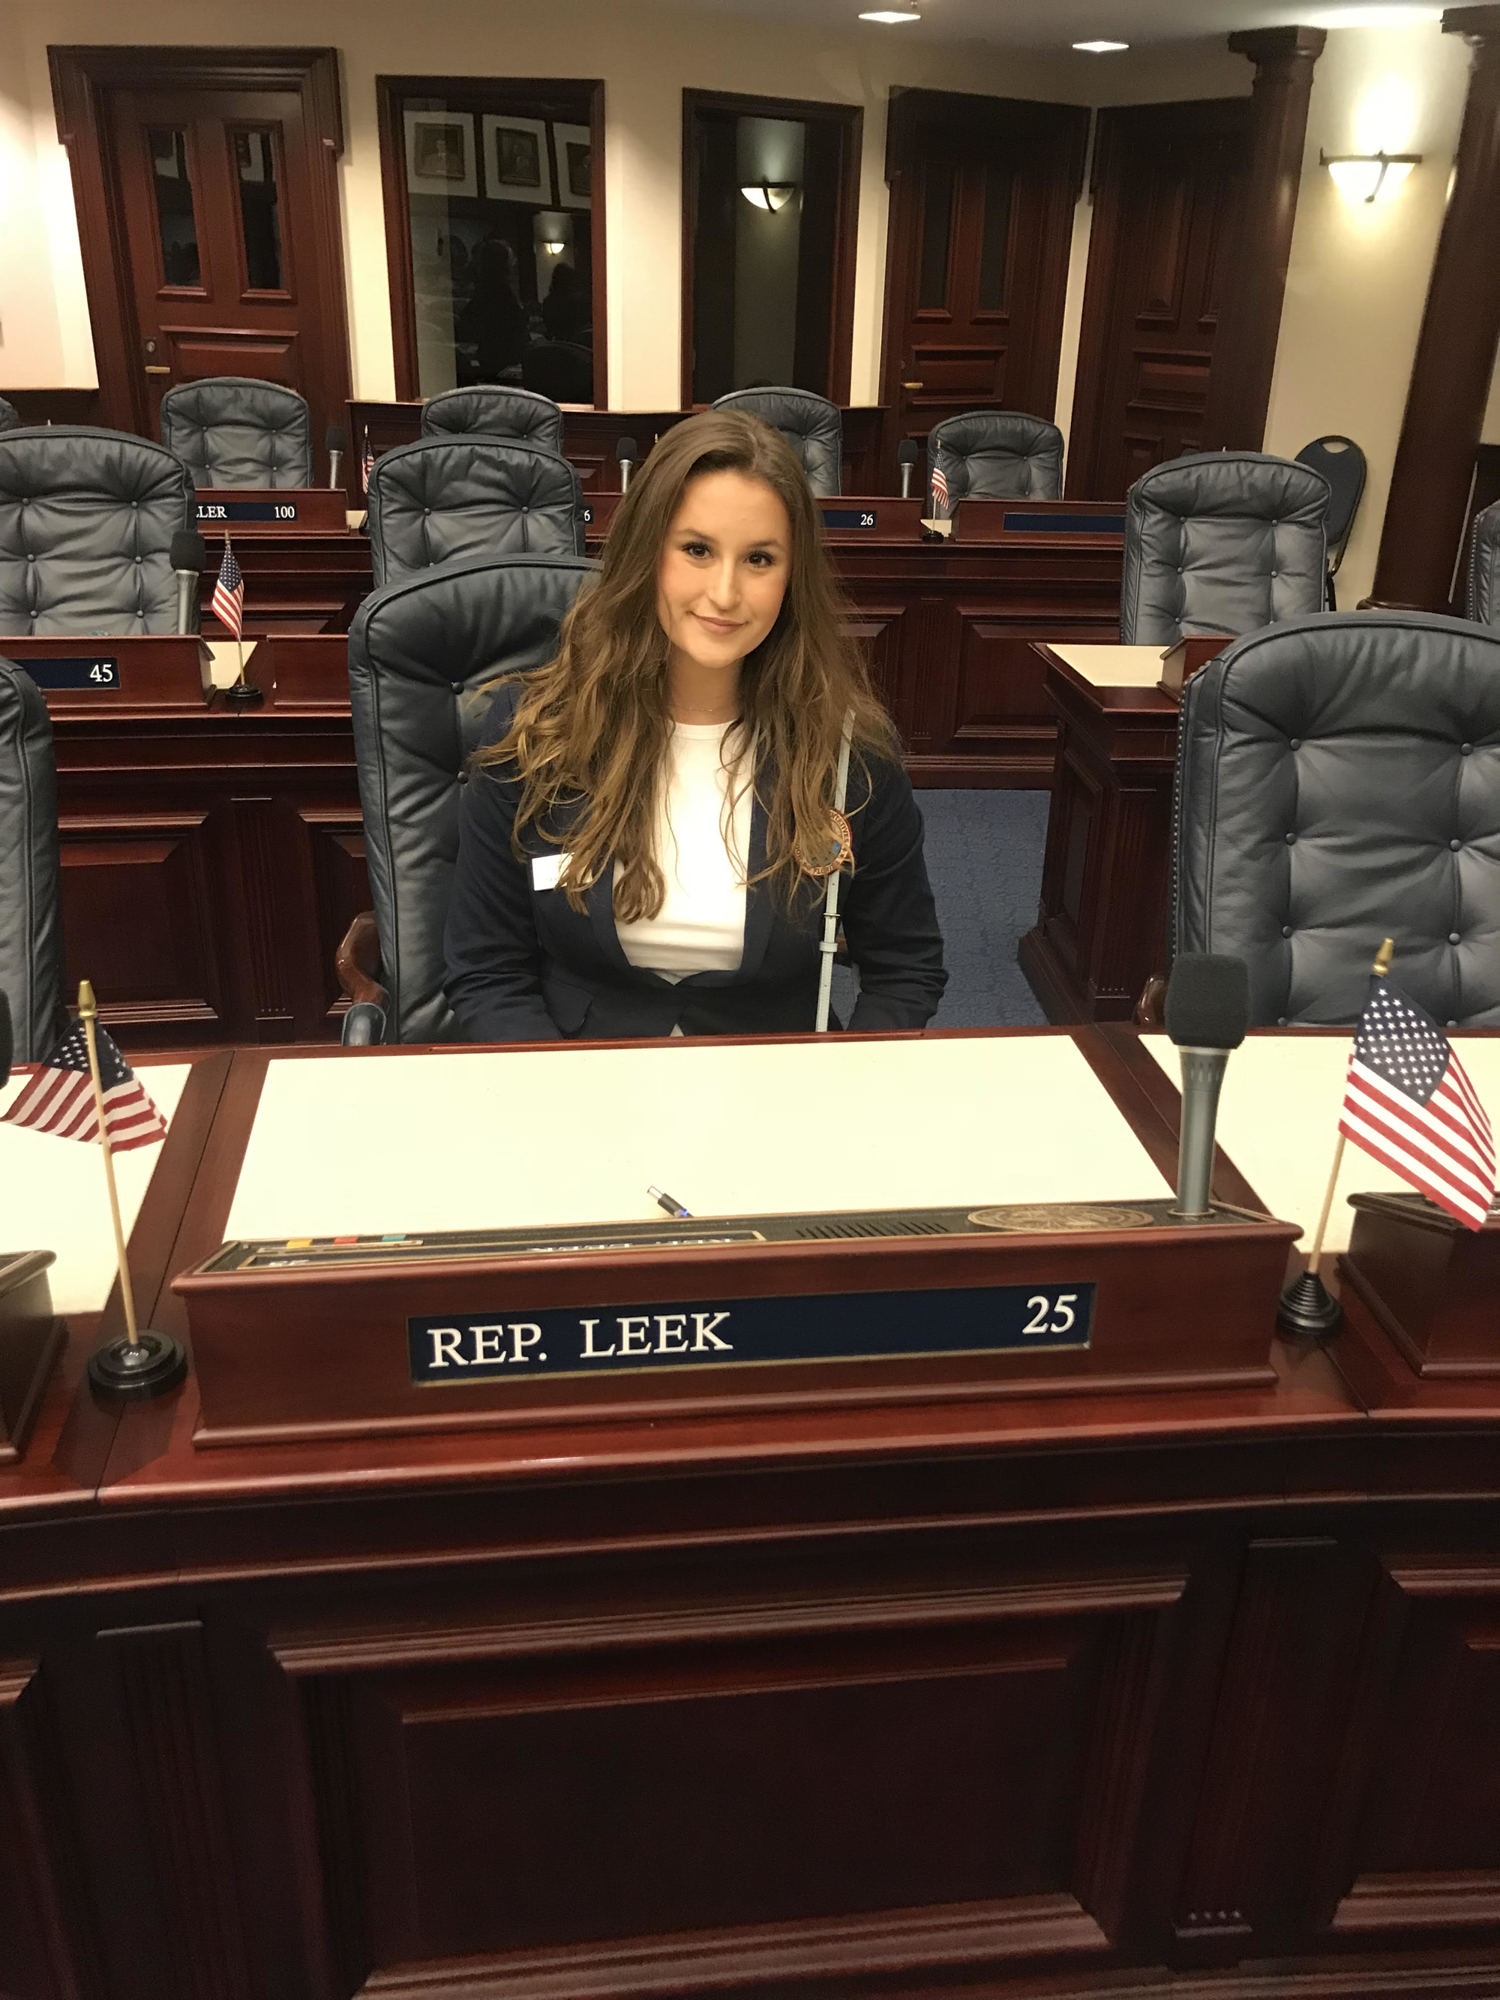 Tia Kearney attended the Florida House of Representatives Messenger program for one week on Feb 12-16, in Tallahassee. Photo courtesy of Melissa Kearney